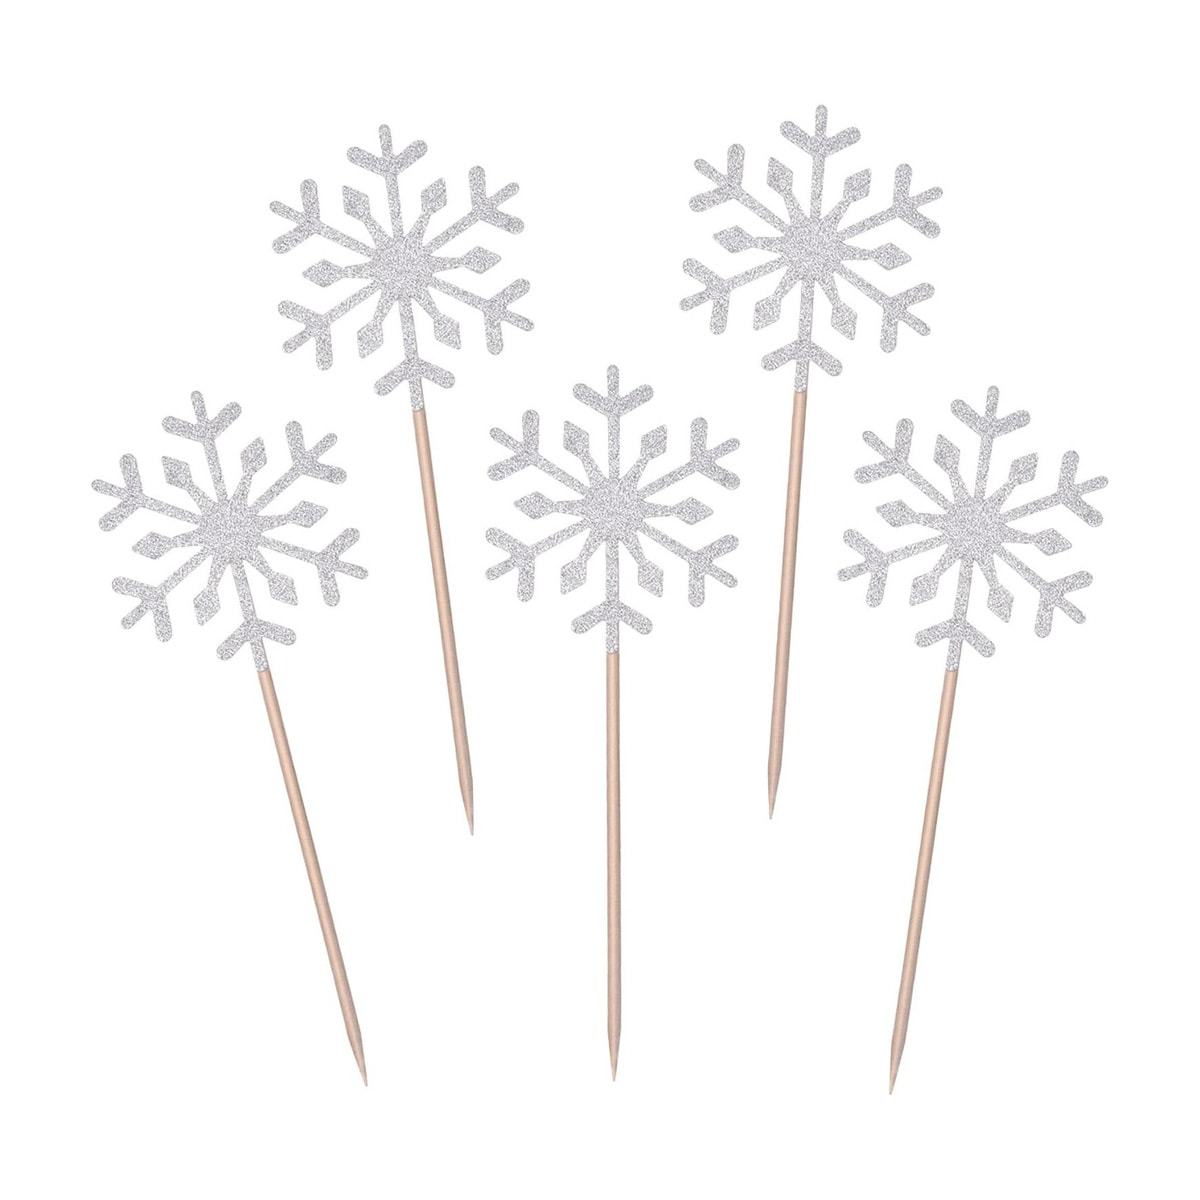 Snowflake cupcake toppers.